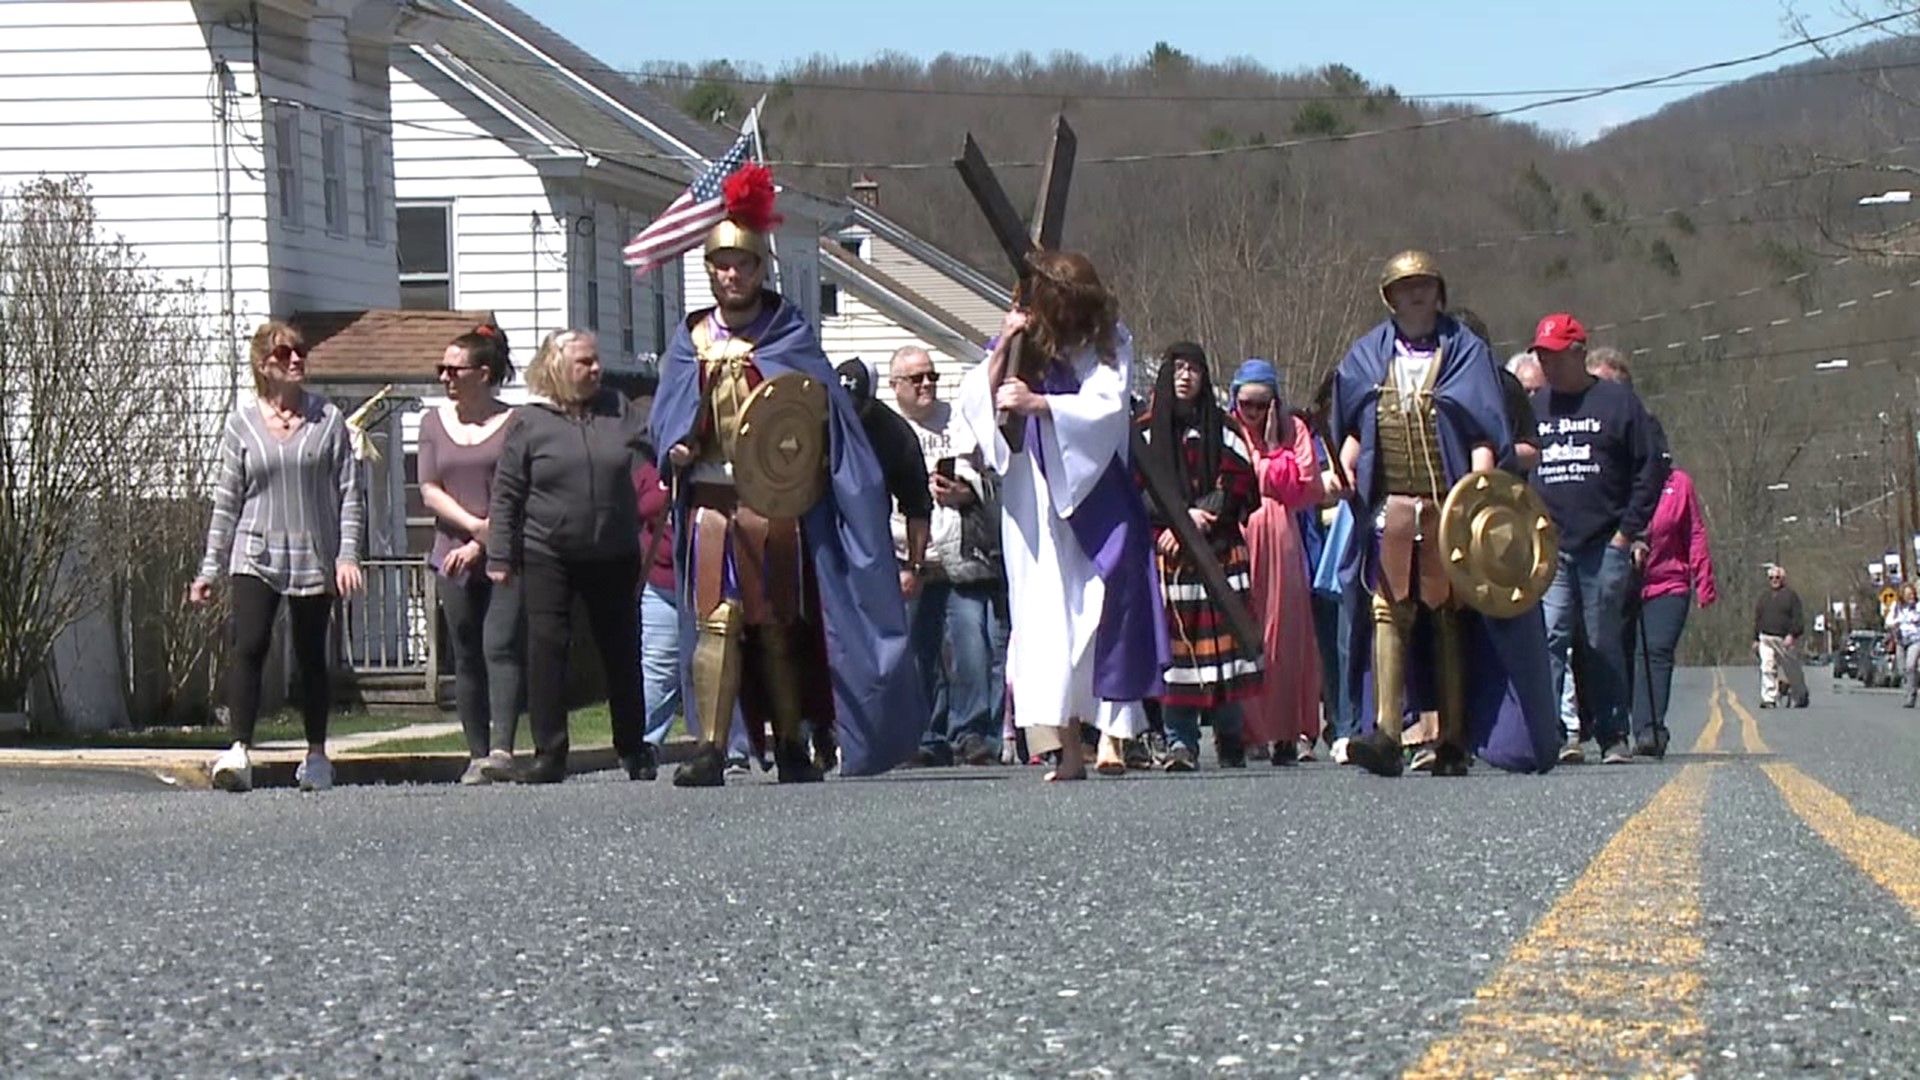 In honor of Good Friday, people filled the streets of downtown Gordon for the annual Trek of the Cross. A tradition for residents of Schuylkill County.